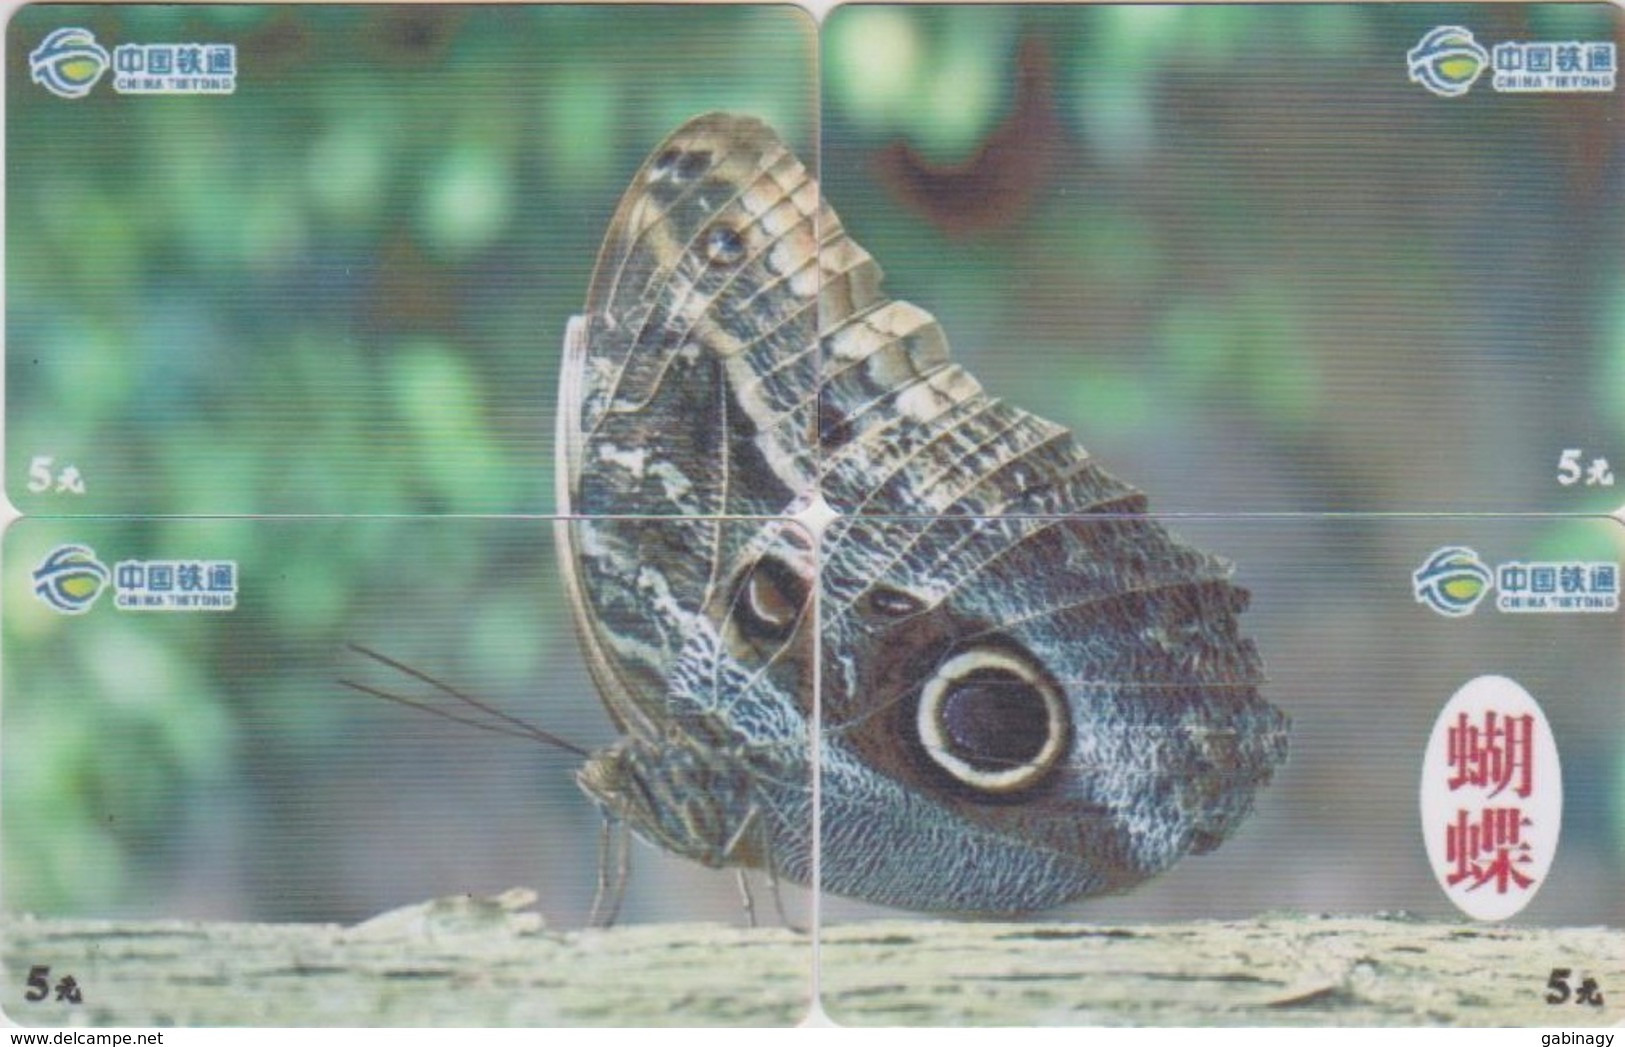 CHINA - BUTTERFLY-05 - SET OF 4 CARDS - China